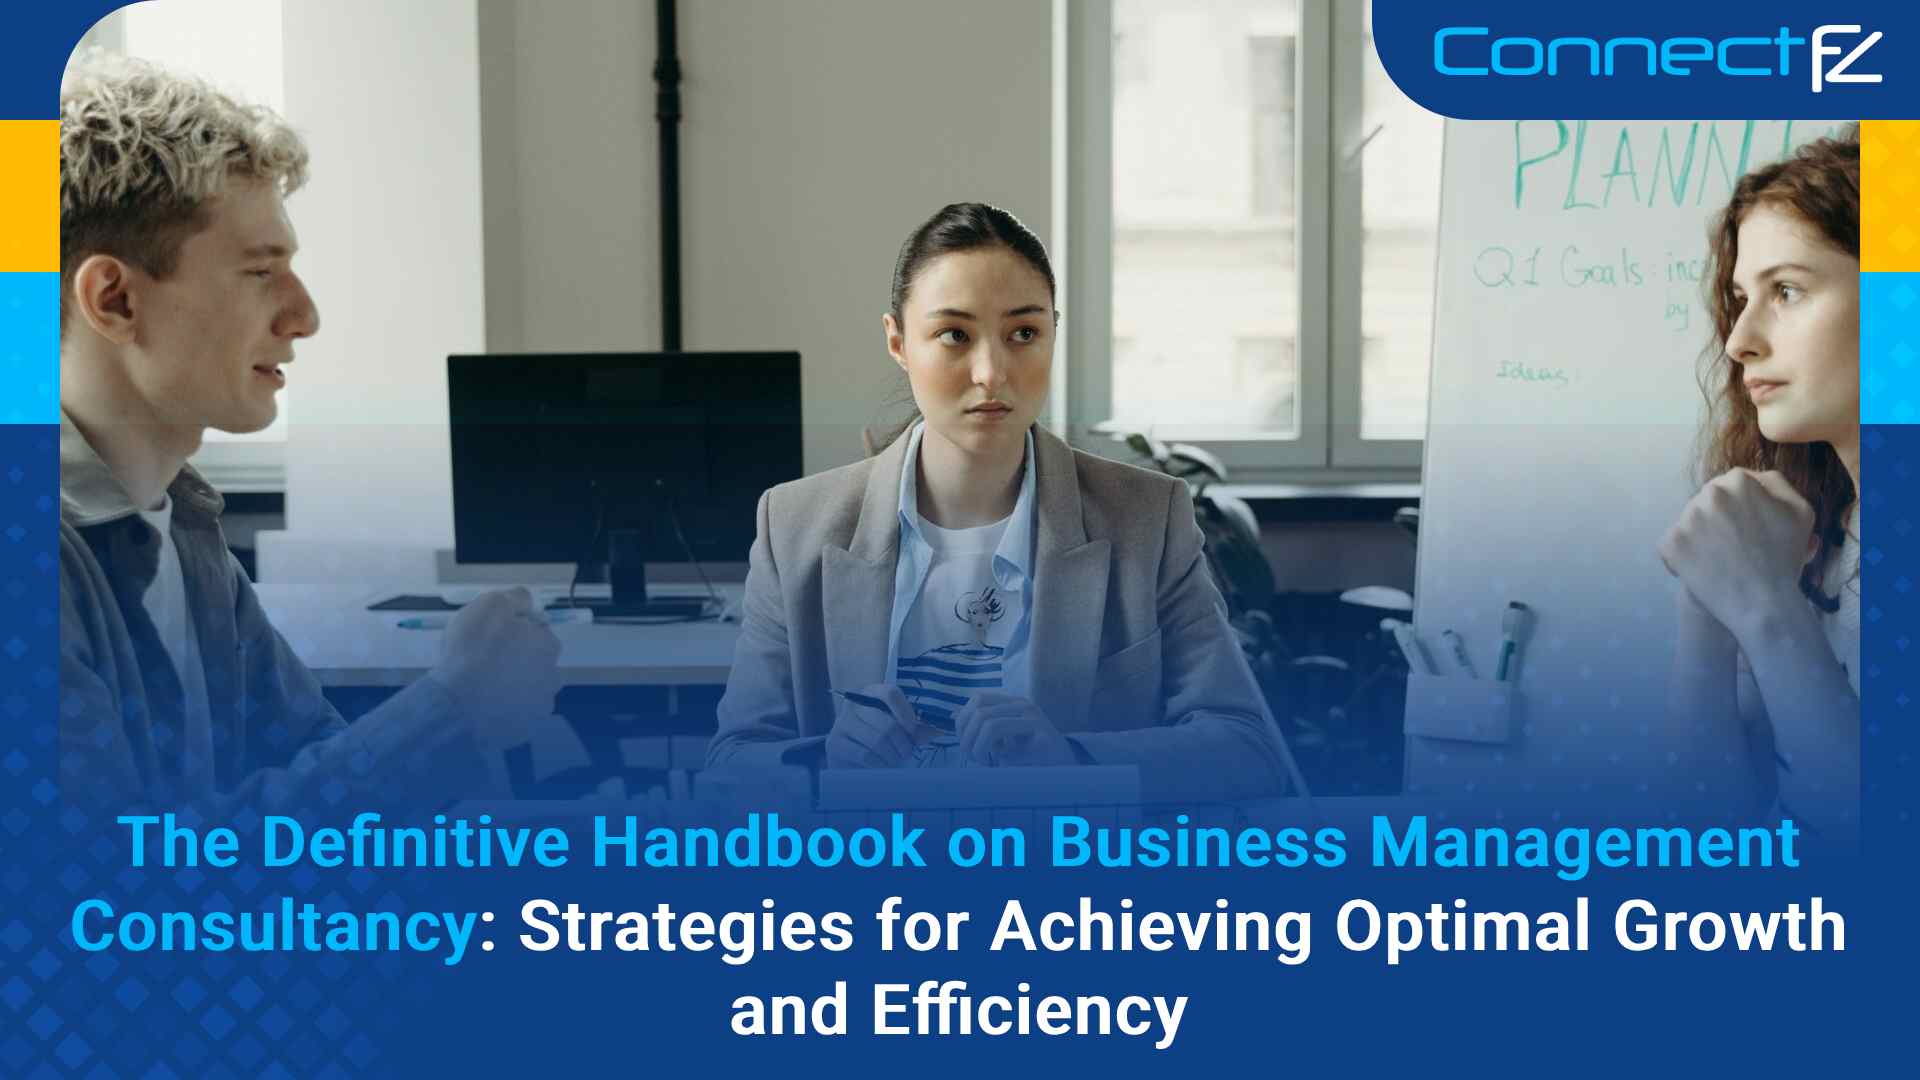 The Definitive Handbook on Business Management Consultancy: Strategies for Achieving Optimal Growth and Efficiency